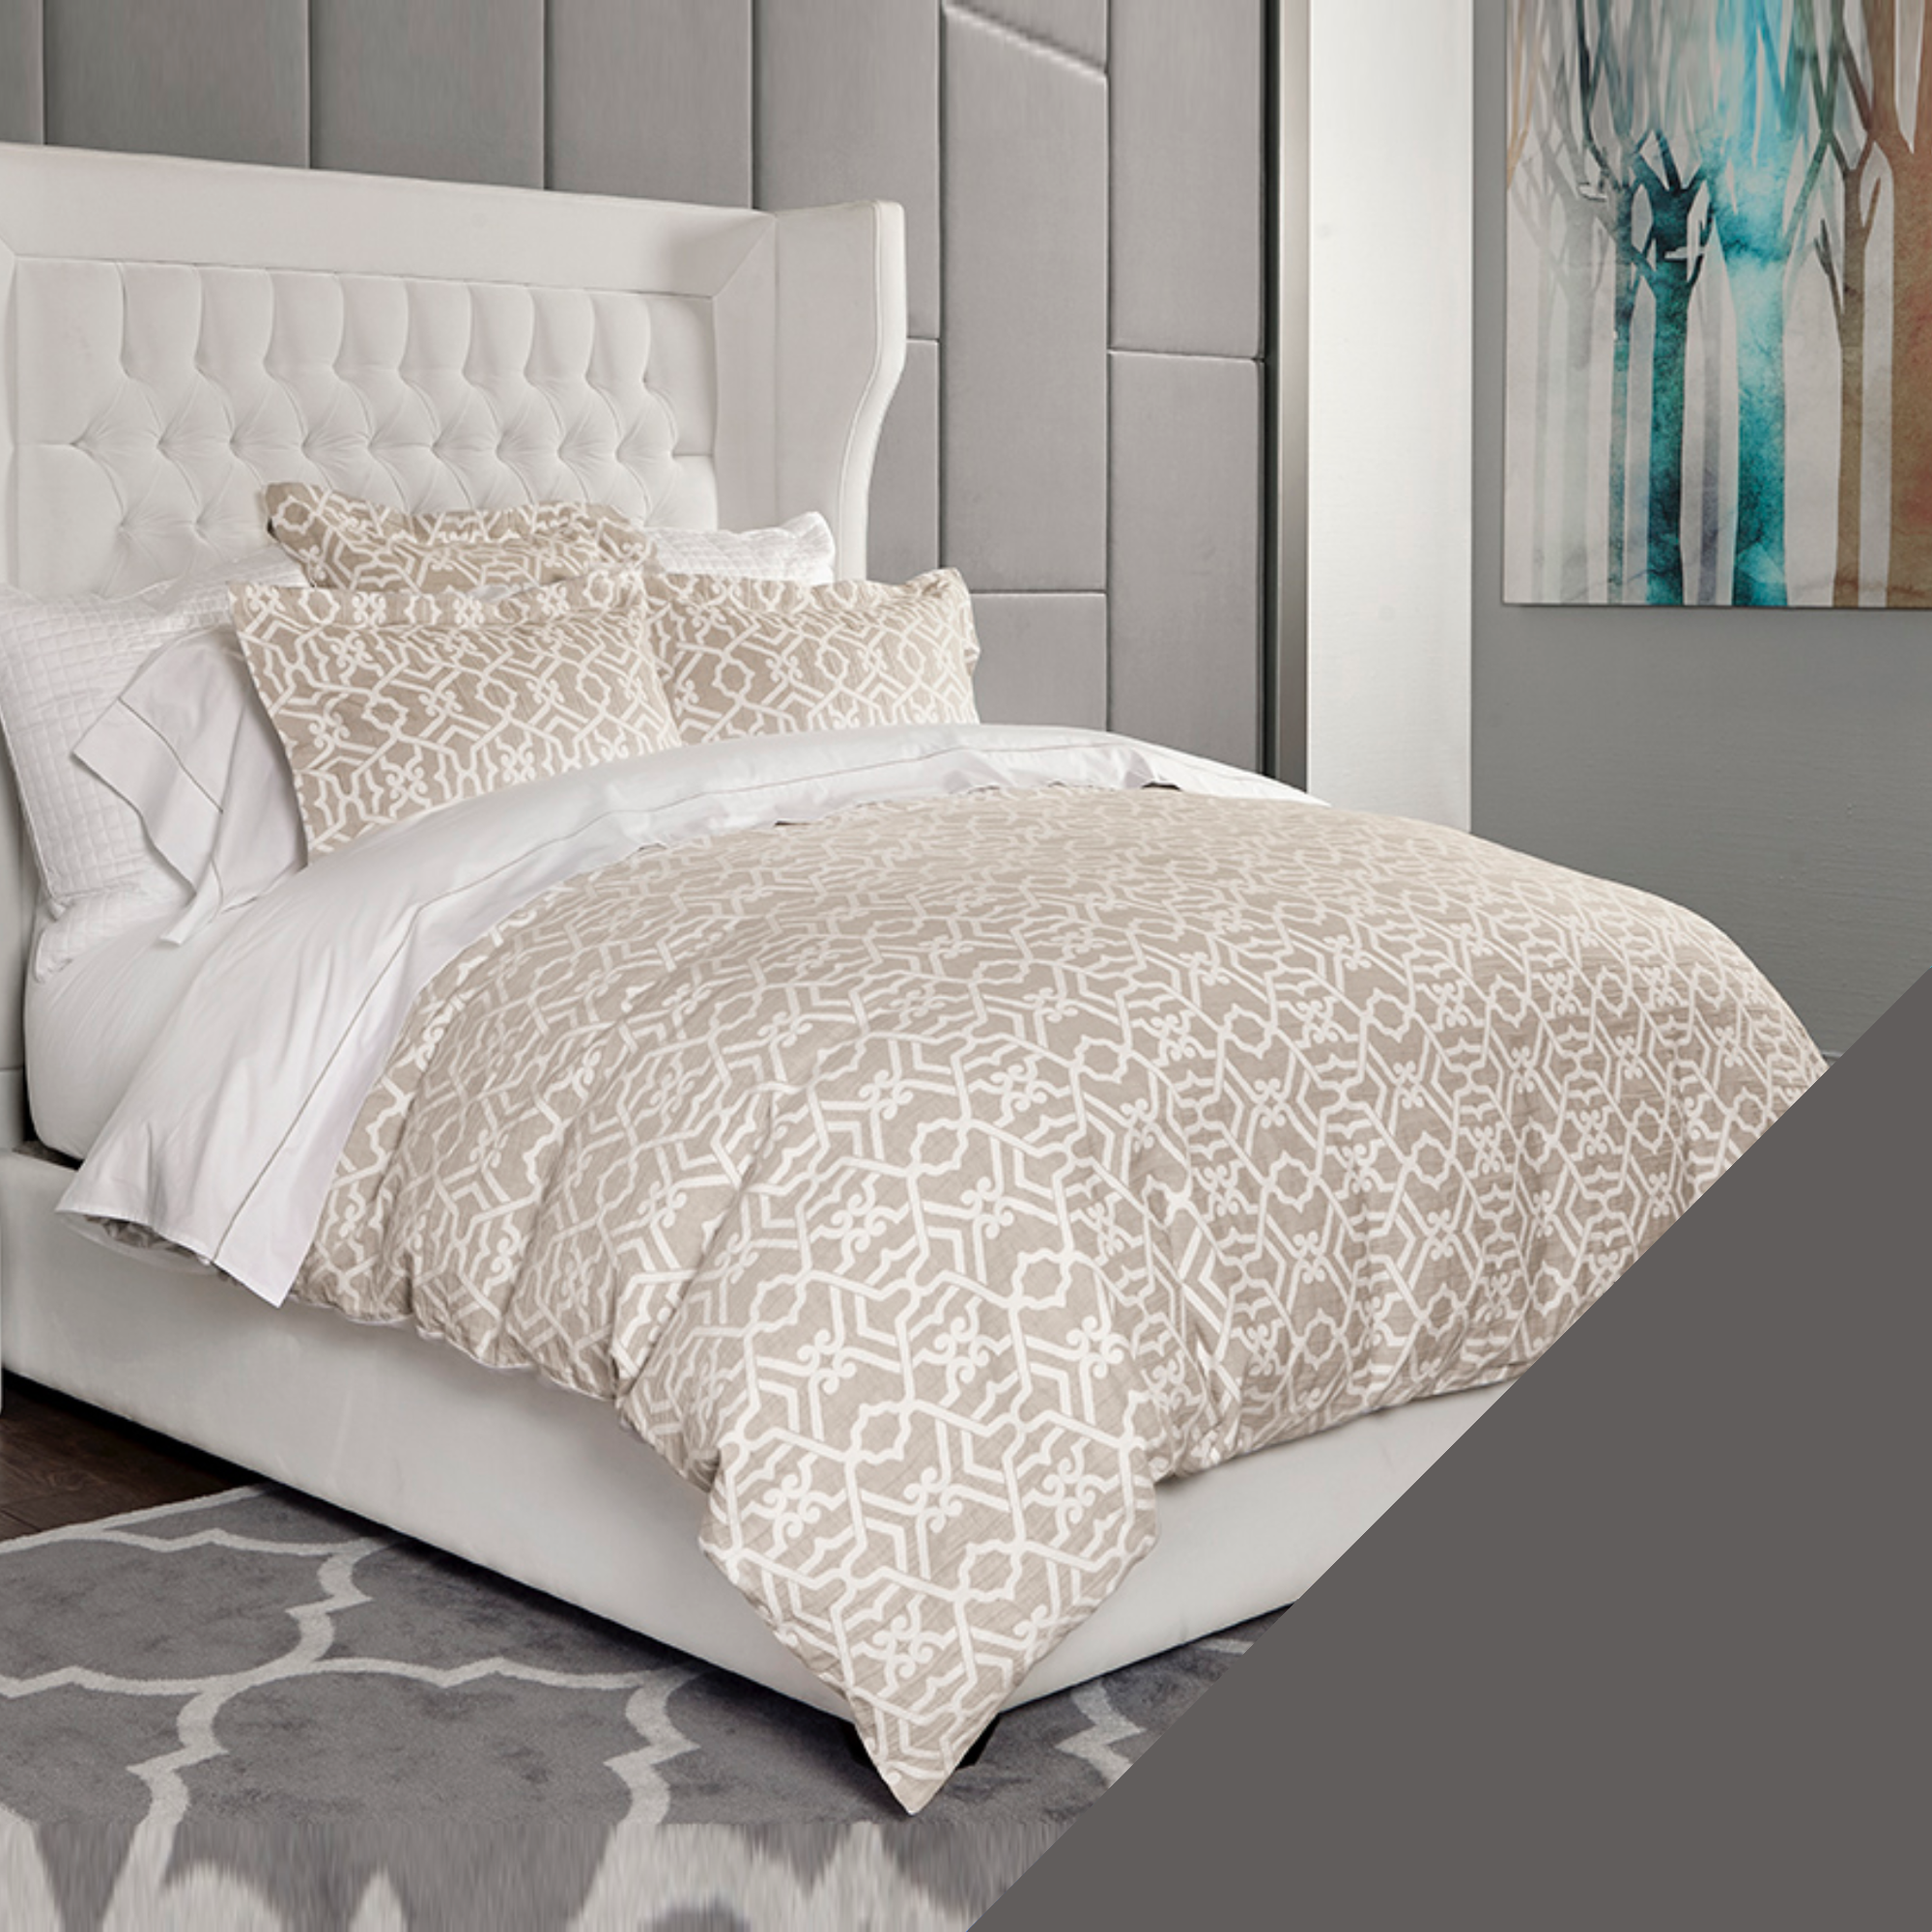 Full Bed Dressed in Downtown Company Taylor Bedding in Taupe Color with Gray Swatch